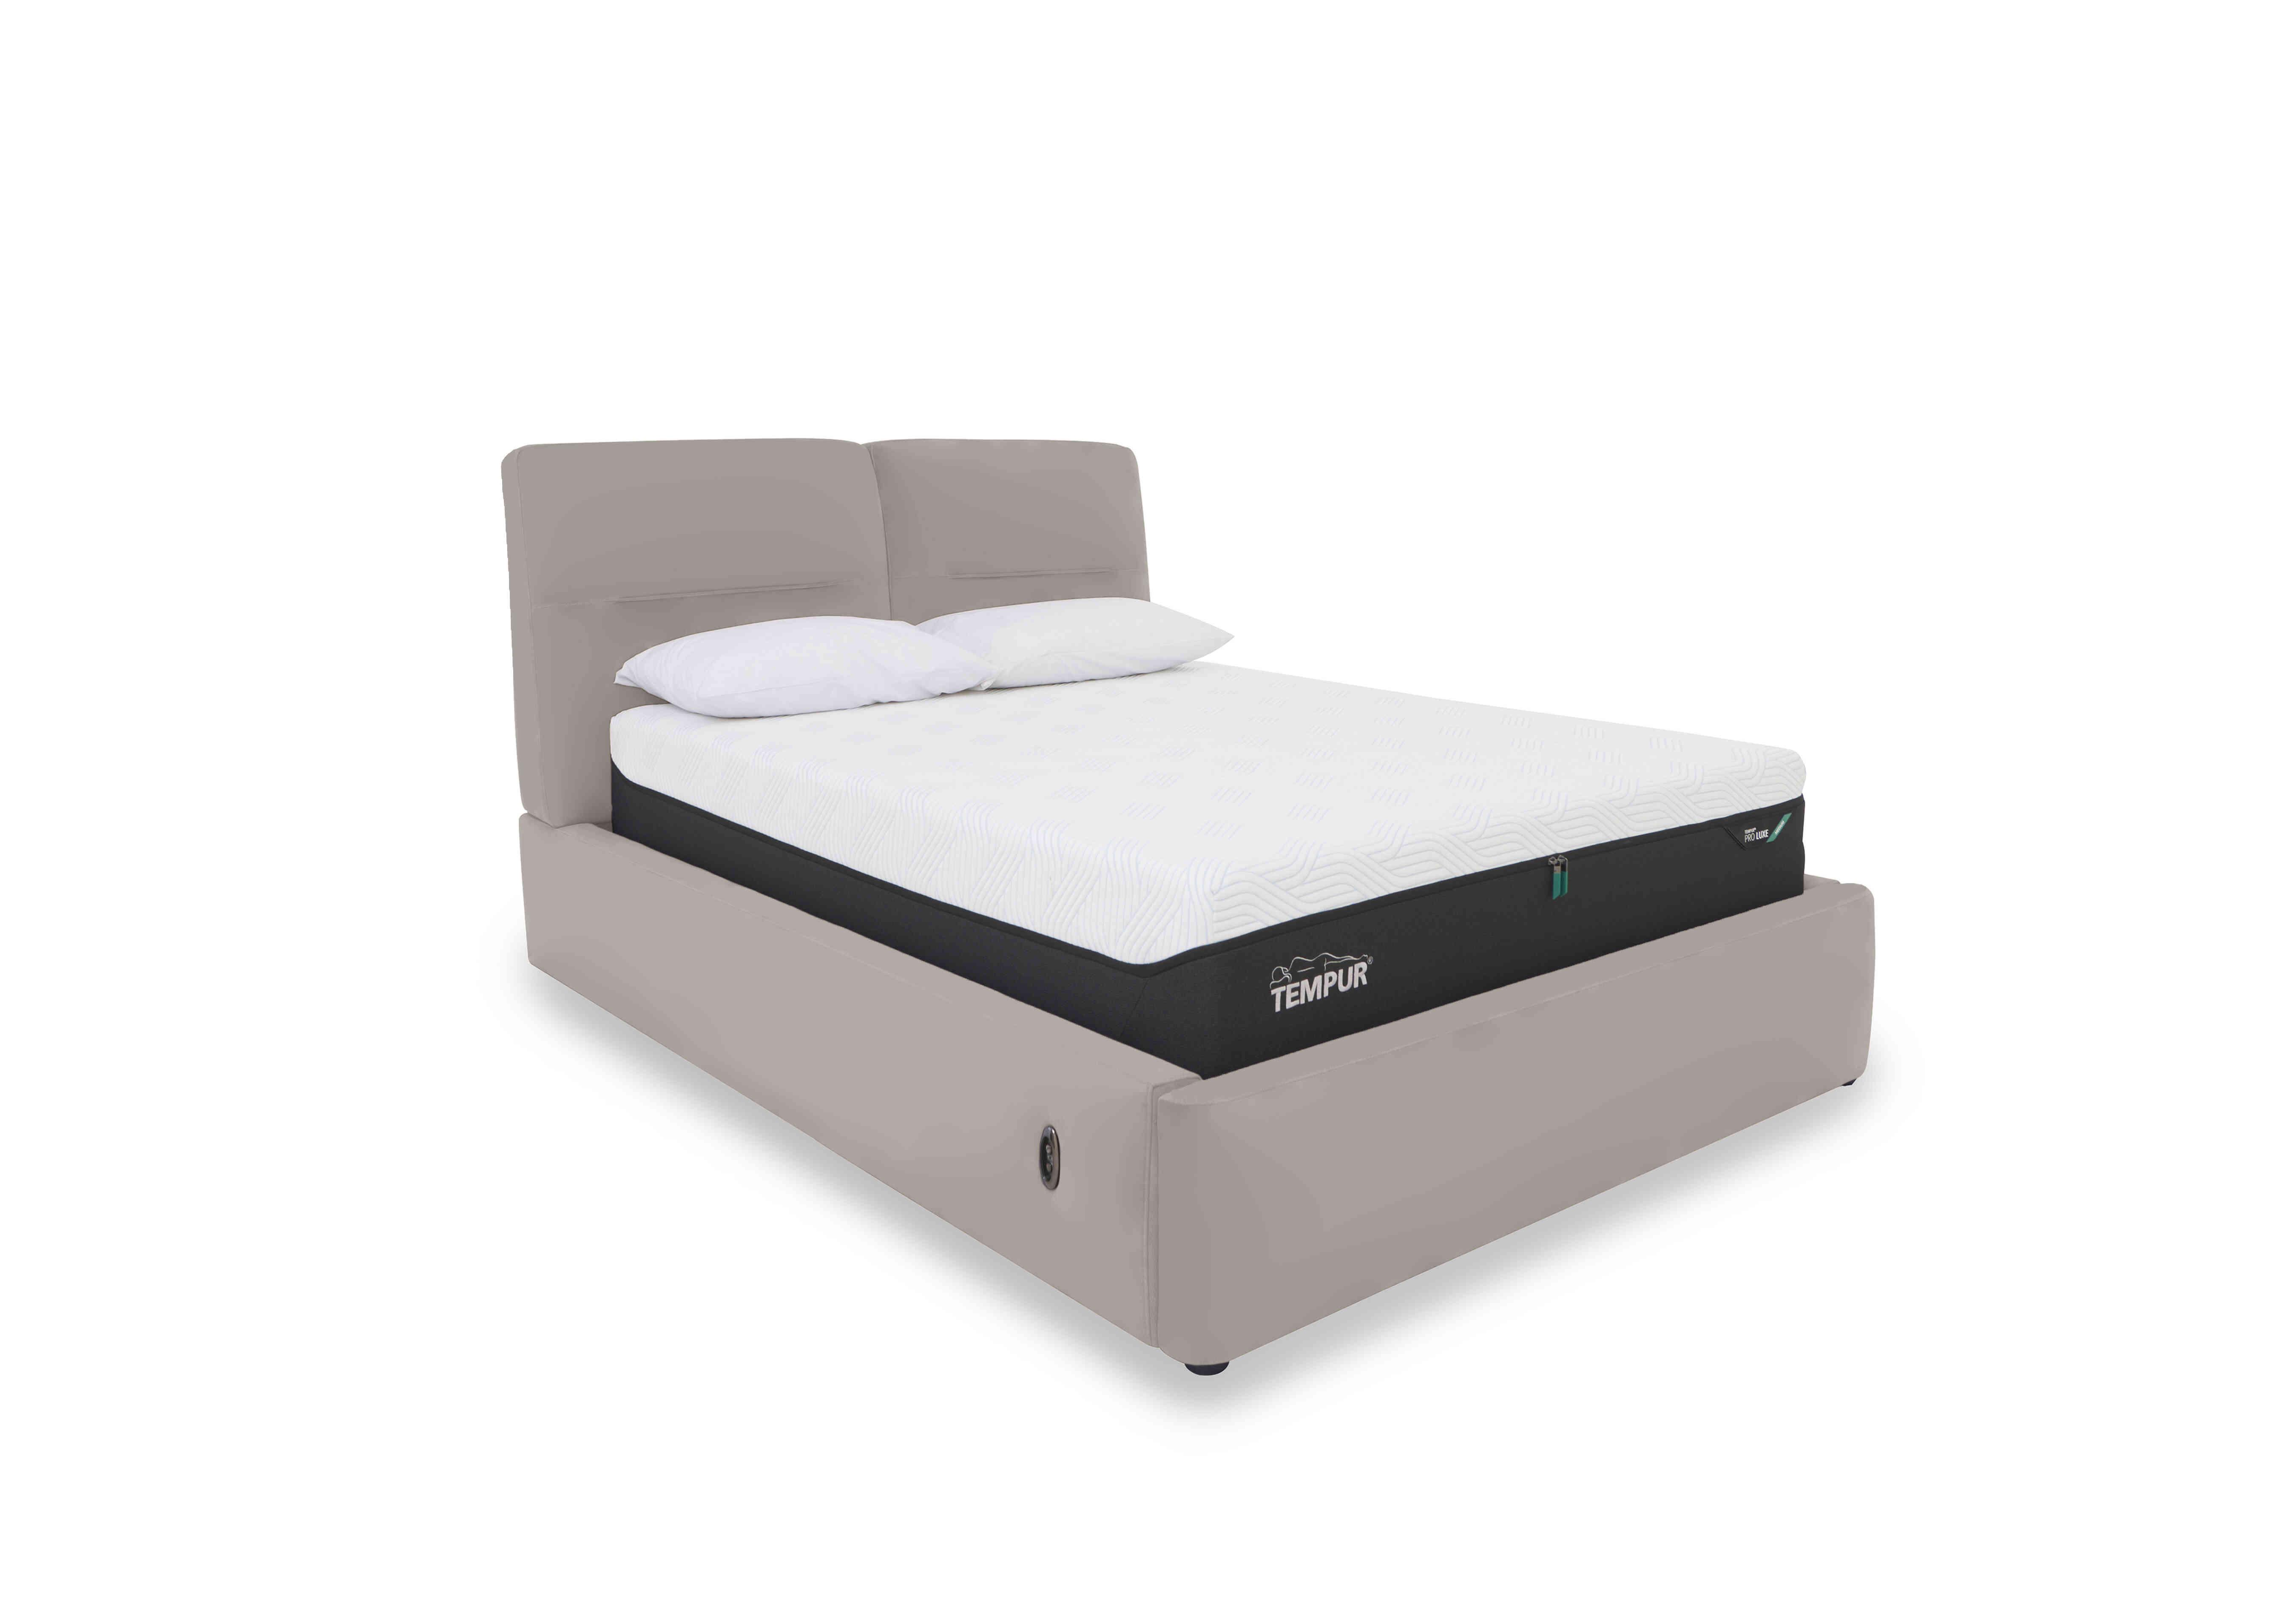 Stark Leather Electric Ottoman Bed Frame in Bv-946b Silver Grey on Furniture Village